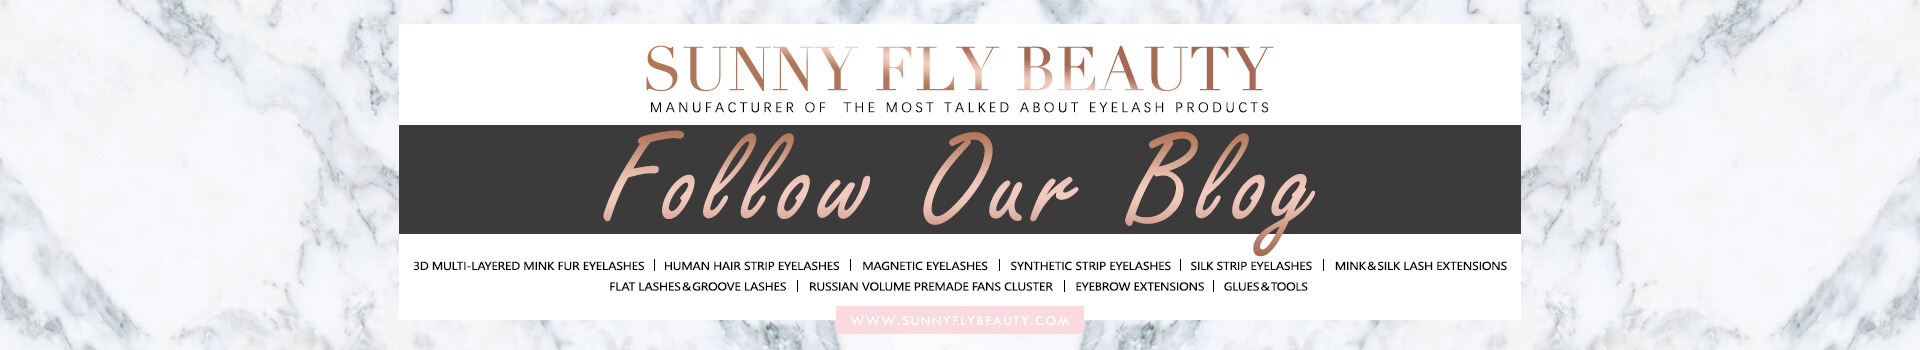 SUNNY FLY BEAUTY has successfully participated in the WorldBeauty Middle East